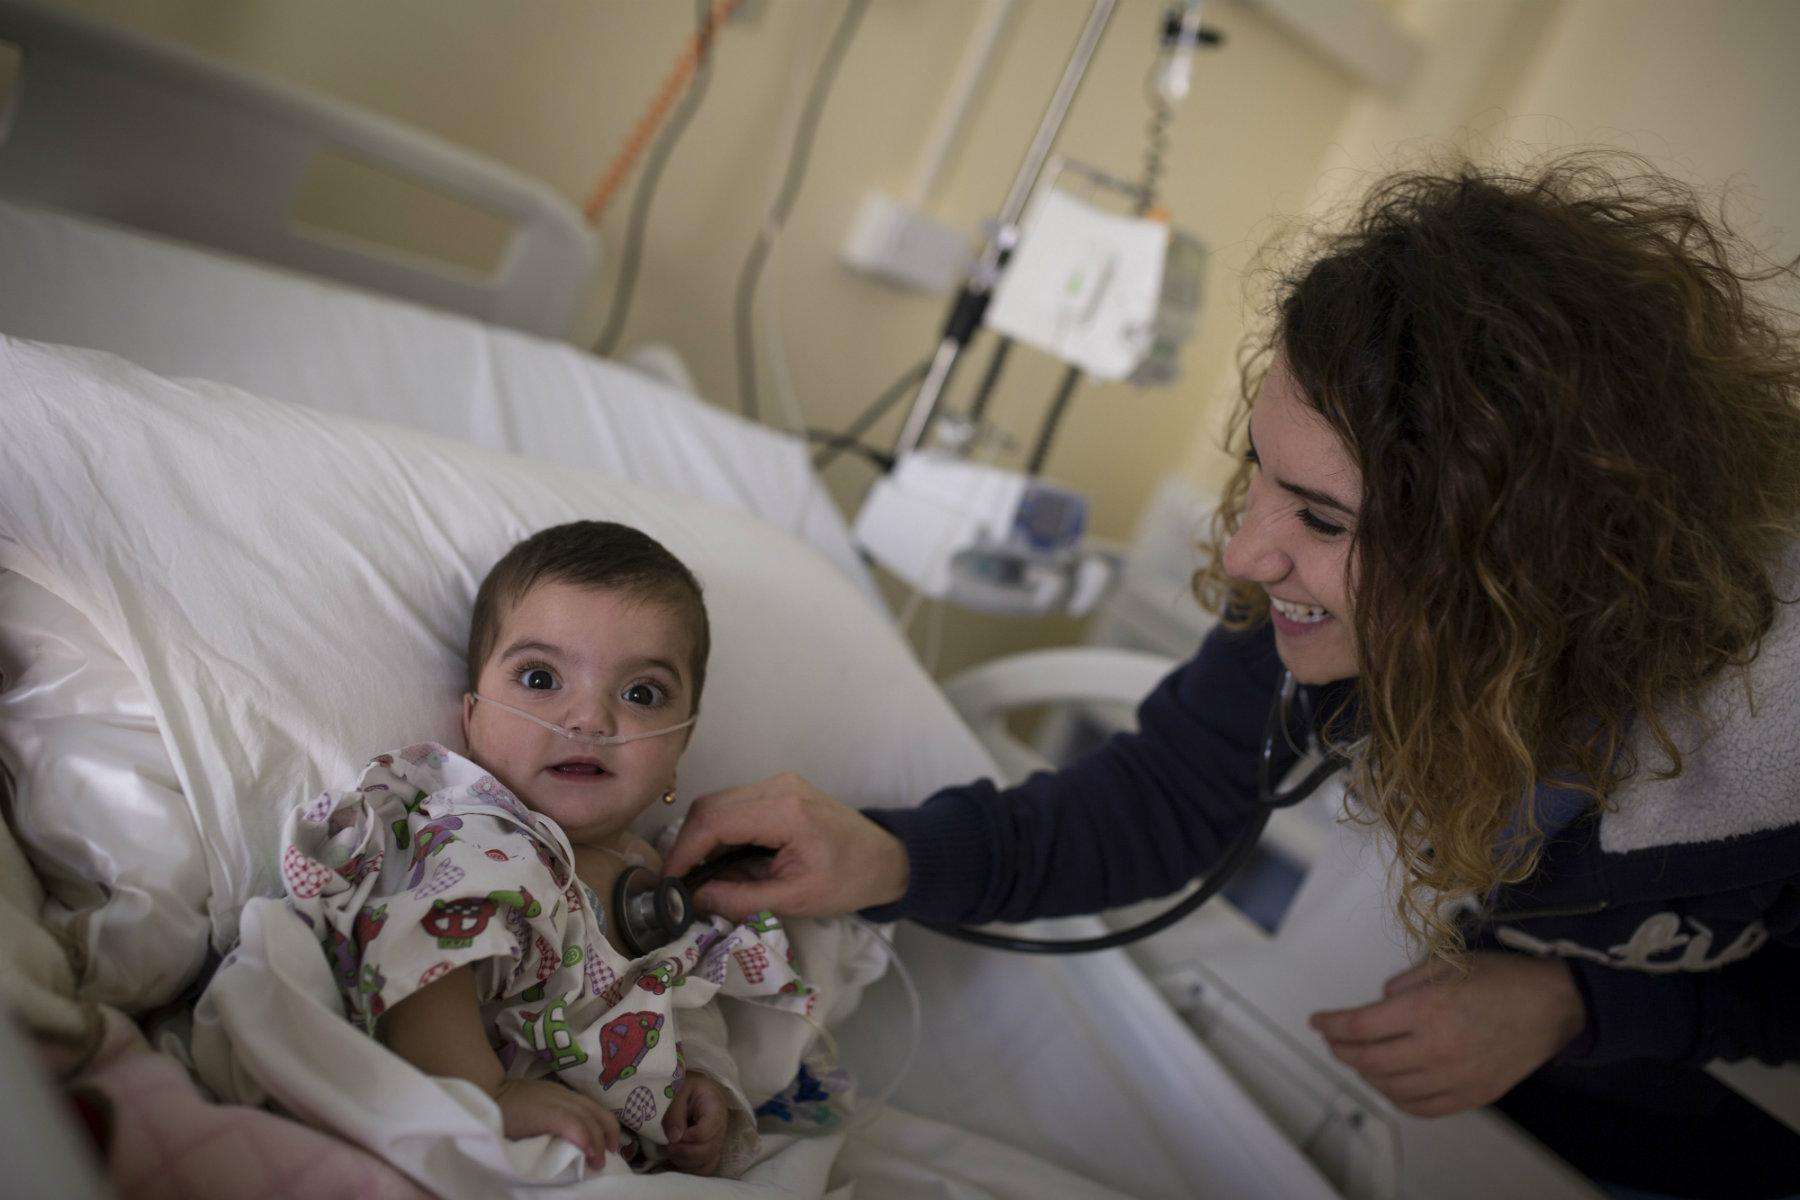 MSF operates free pediatric services in Zahle, a city in the Bekaa Valley where 500,000 Syrian refugees live. 